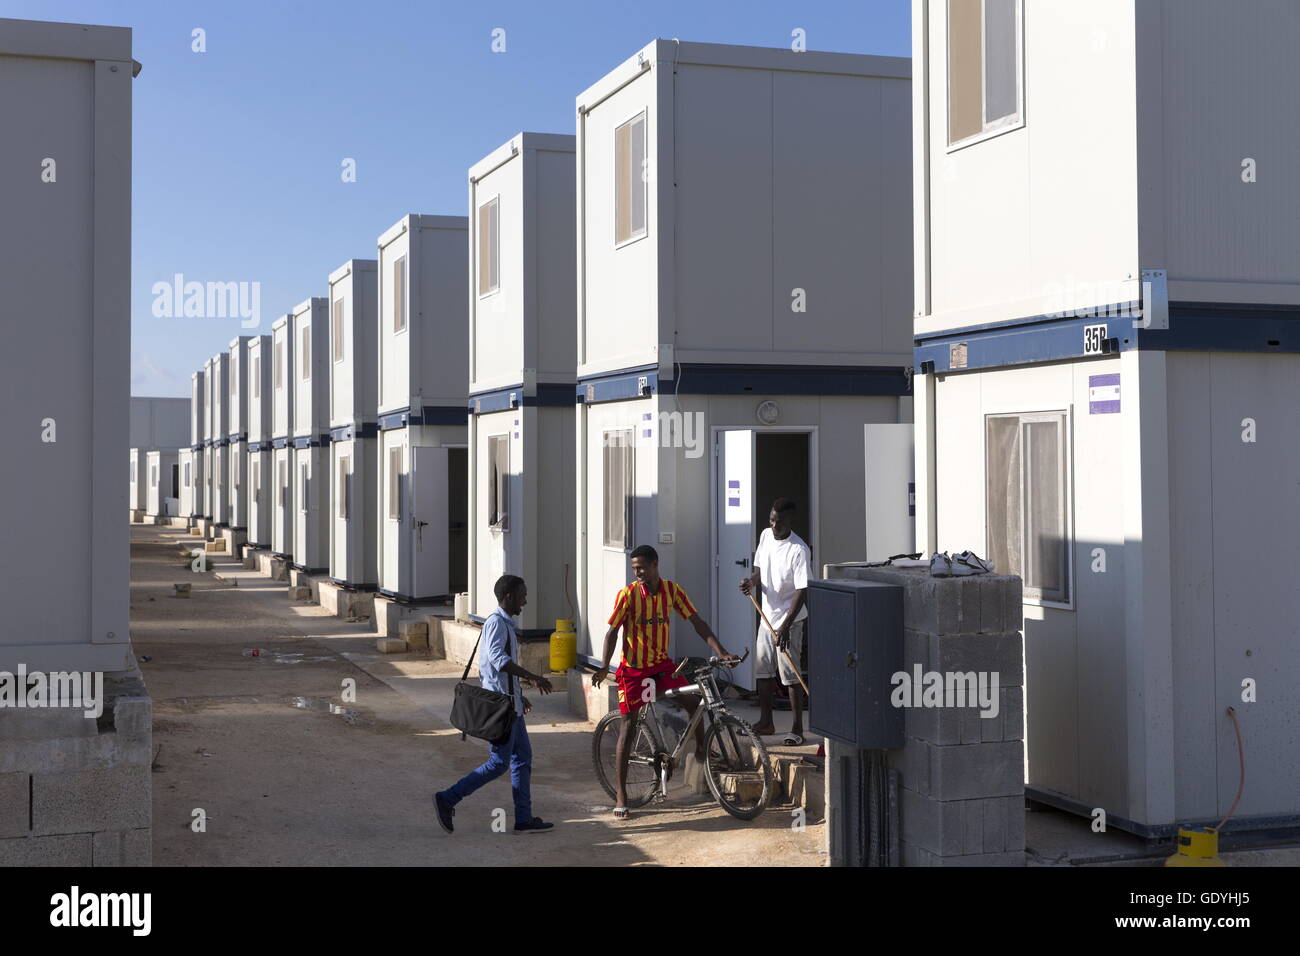 A refugee camp in Hal Far in the South of Malta. The photo was taken in  August 2014. Photo: Tom Schulze | usage worldwide Stock Photo - Alamy